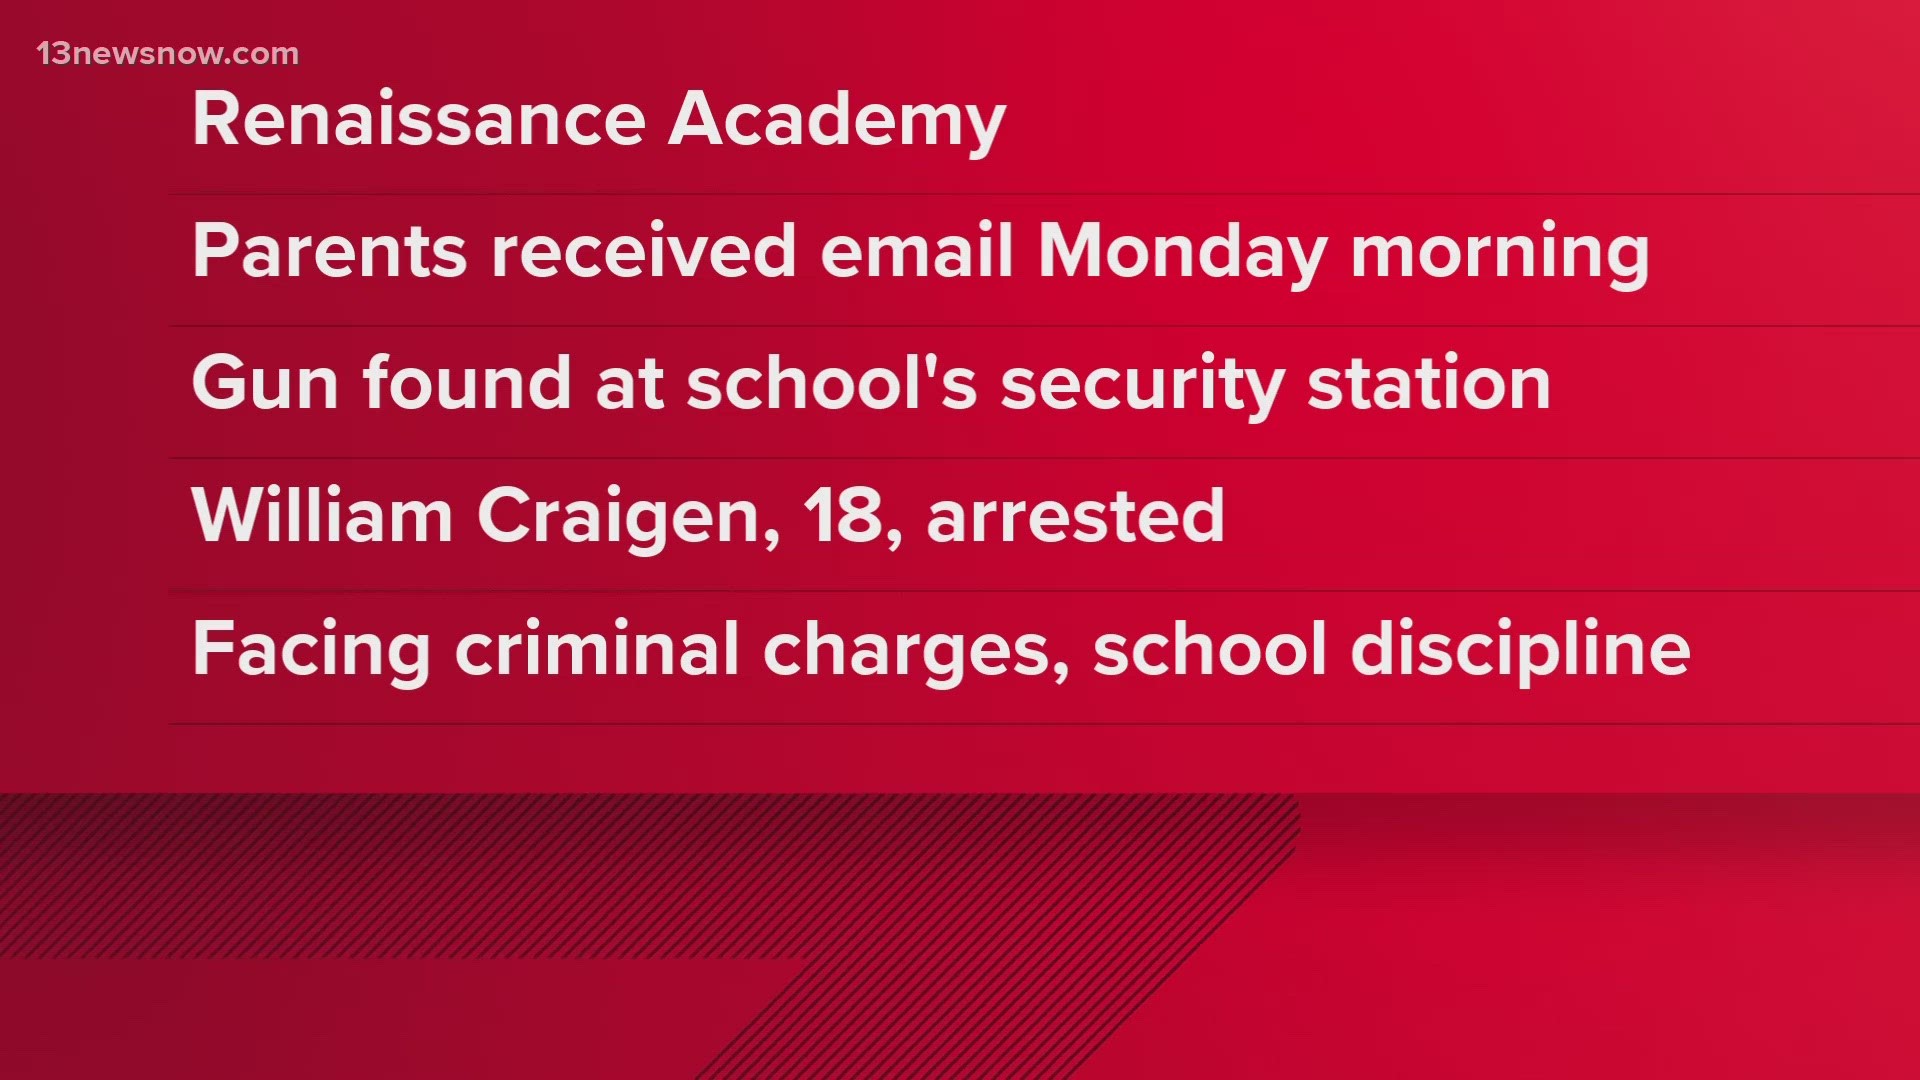 Renaissance Academy Director James Miller said the gun was detected at the school's security station and the student was arrested immediately.